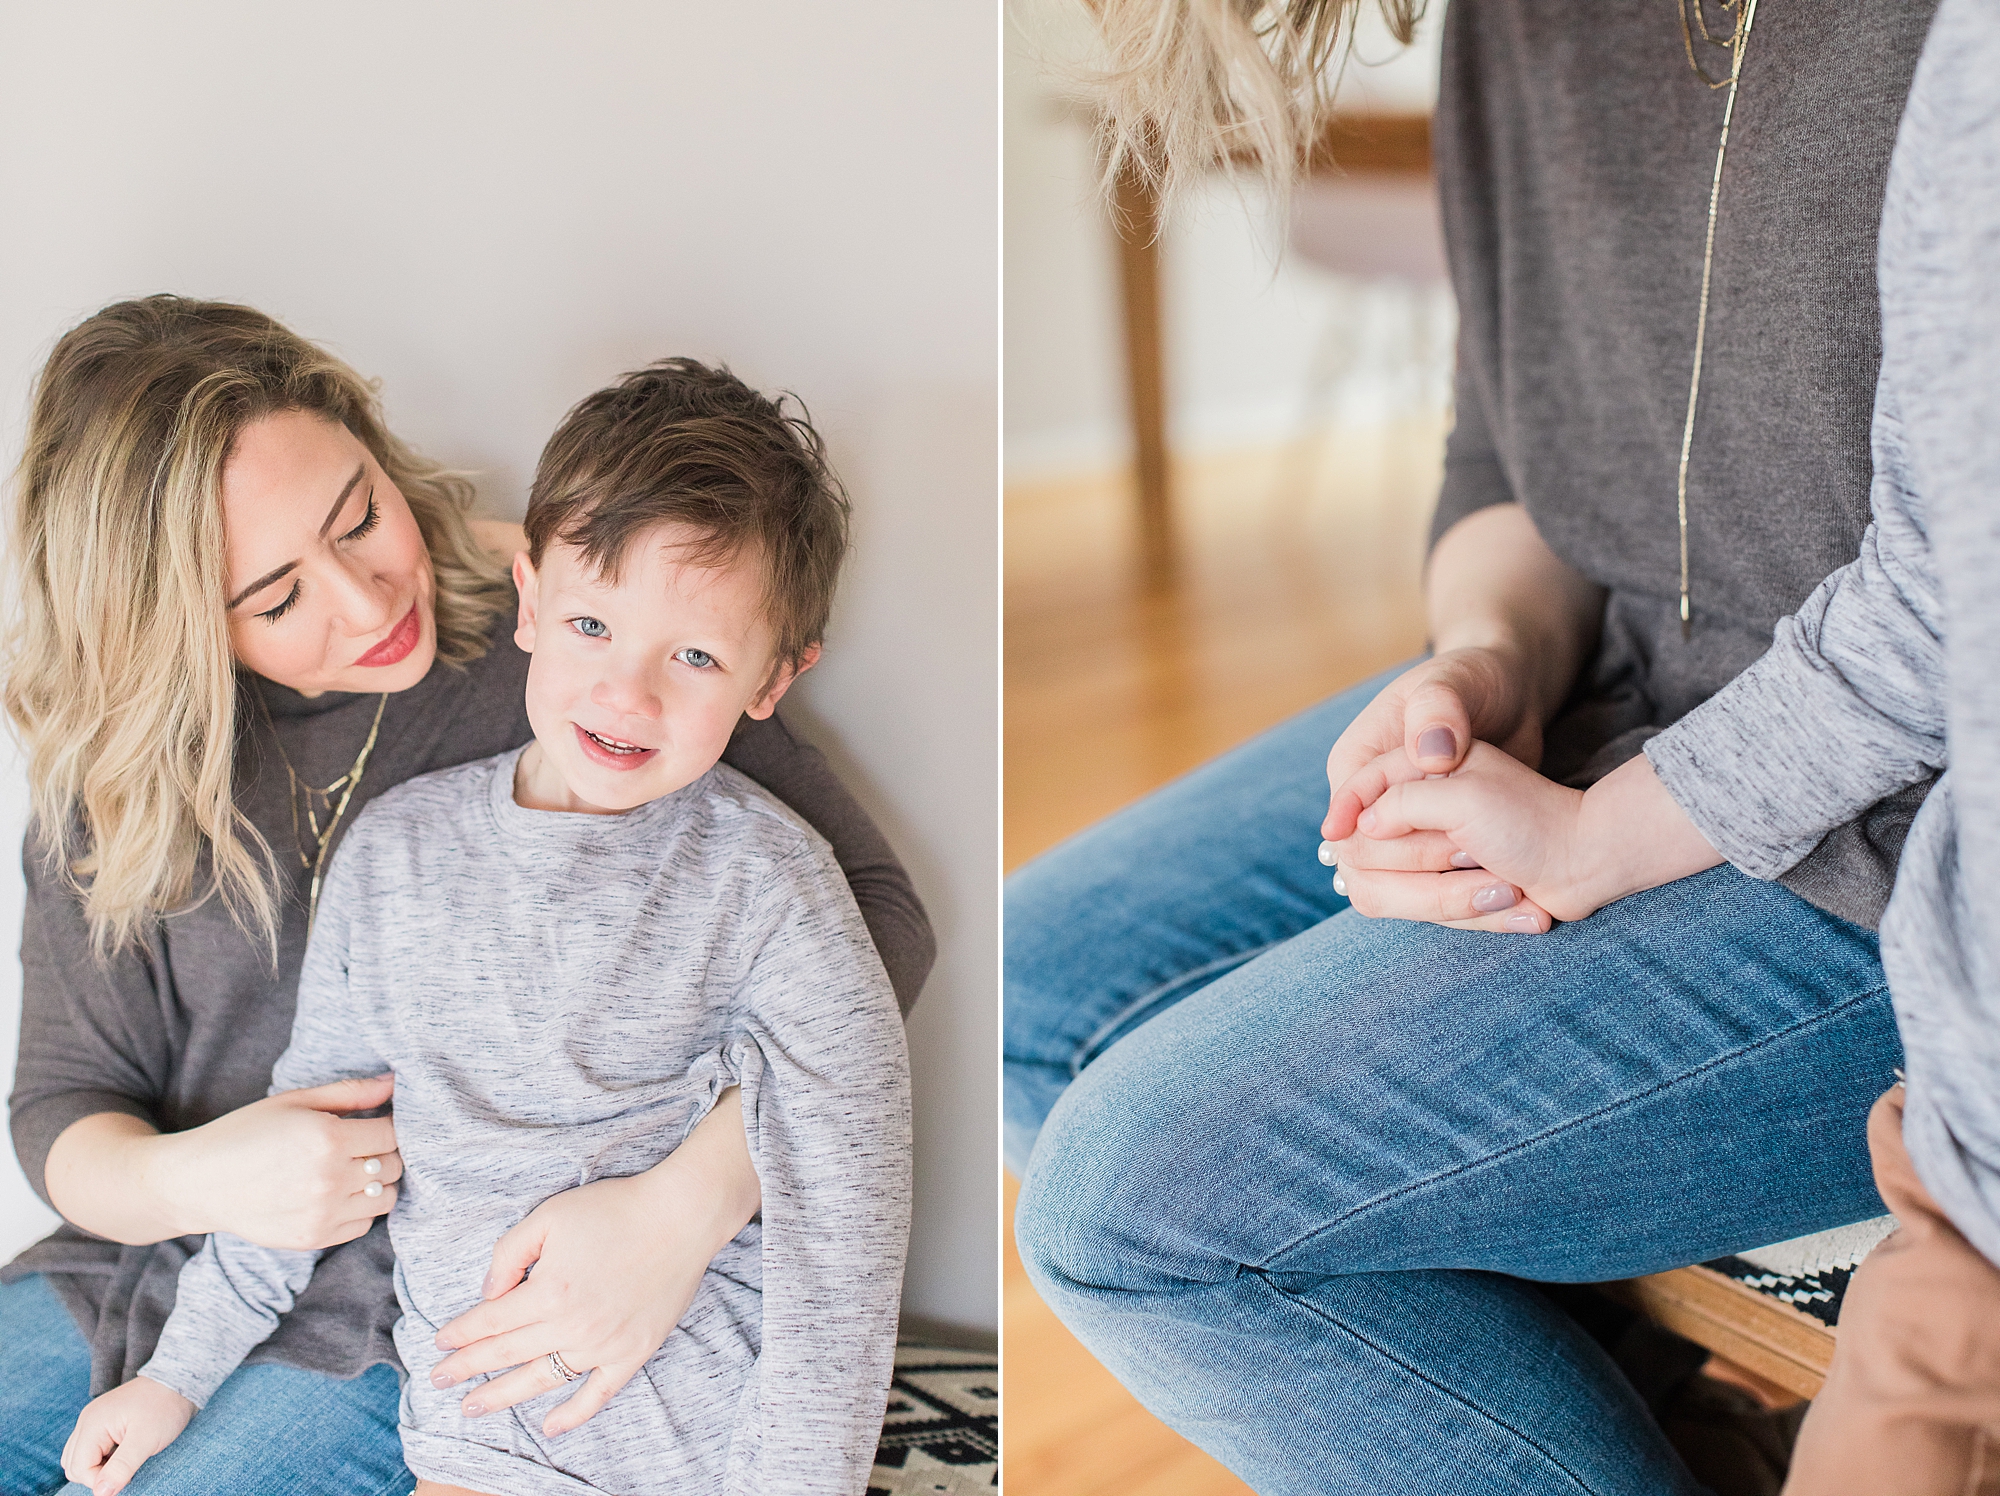 What to Wear for In-Home Session: DMV Lifestyle Photographer Christina Tundo shares four basics for choosing outfits for portraits at home